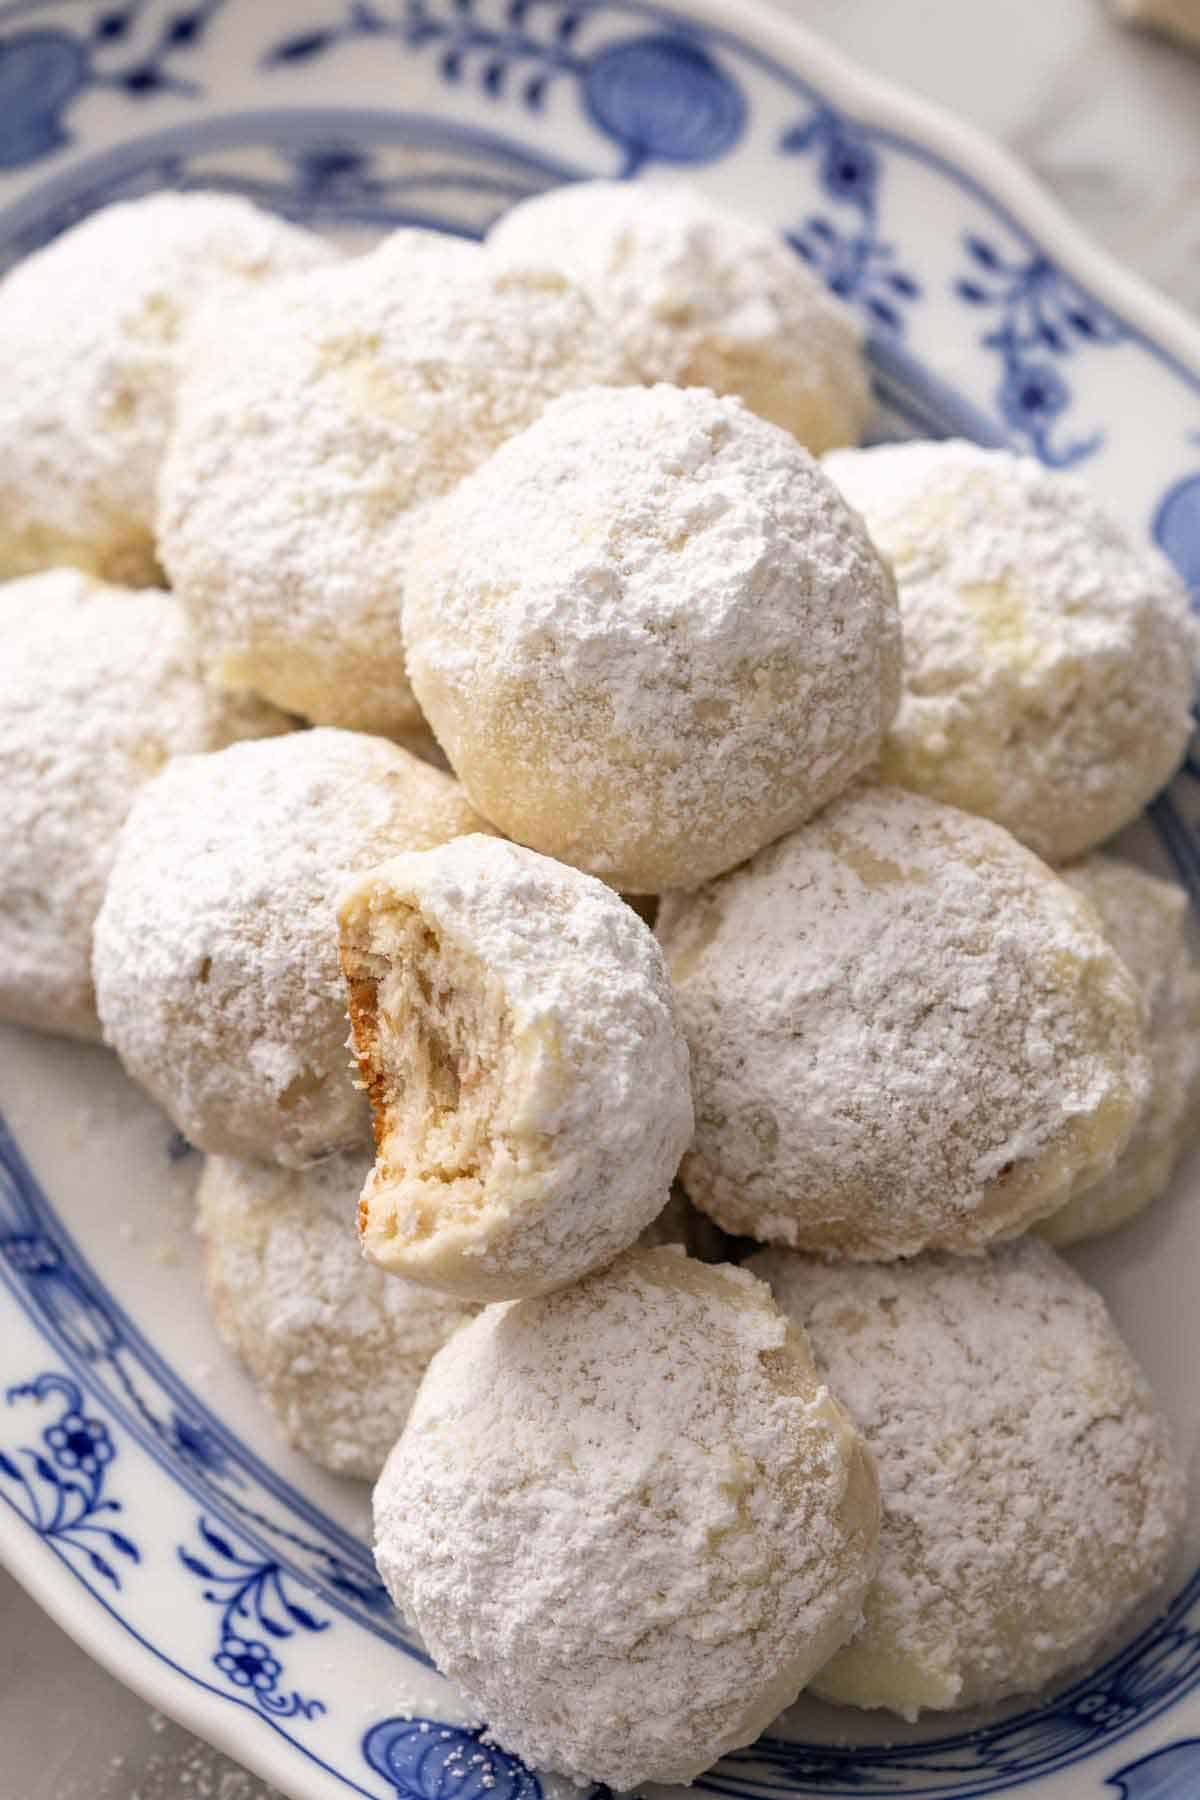 A platter of Mexican wedding cookies, one on top with a bite taken out.